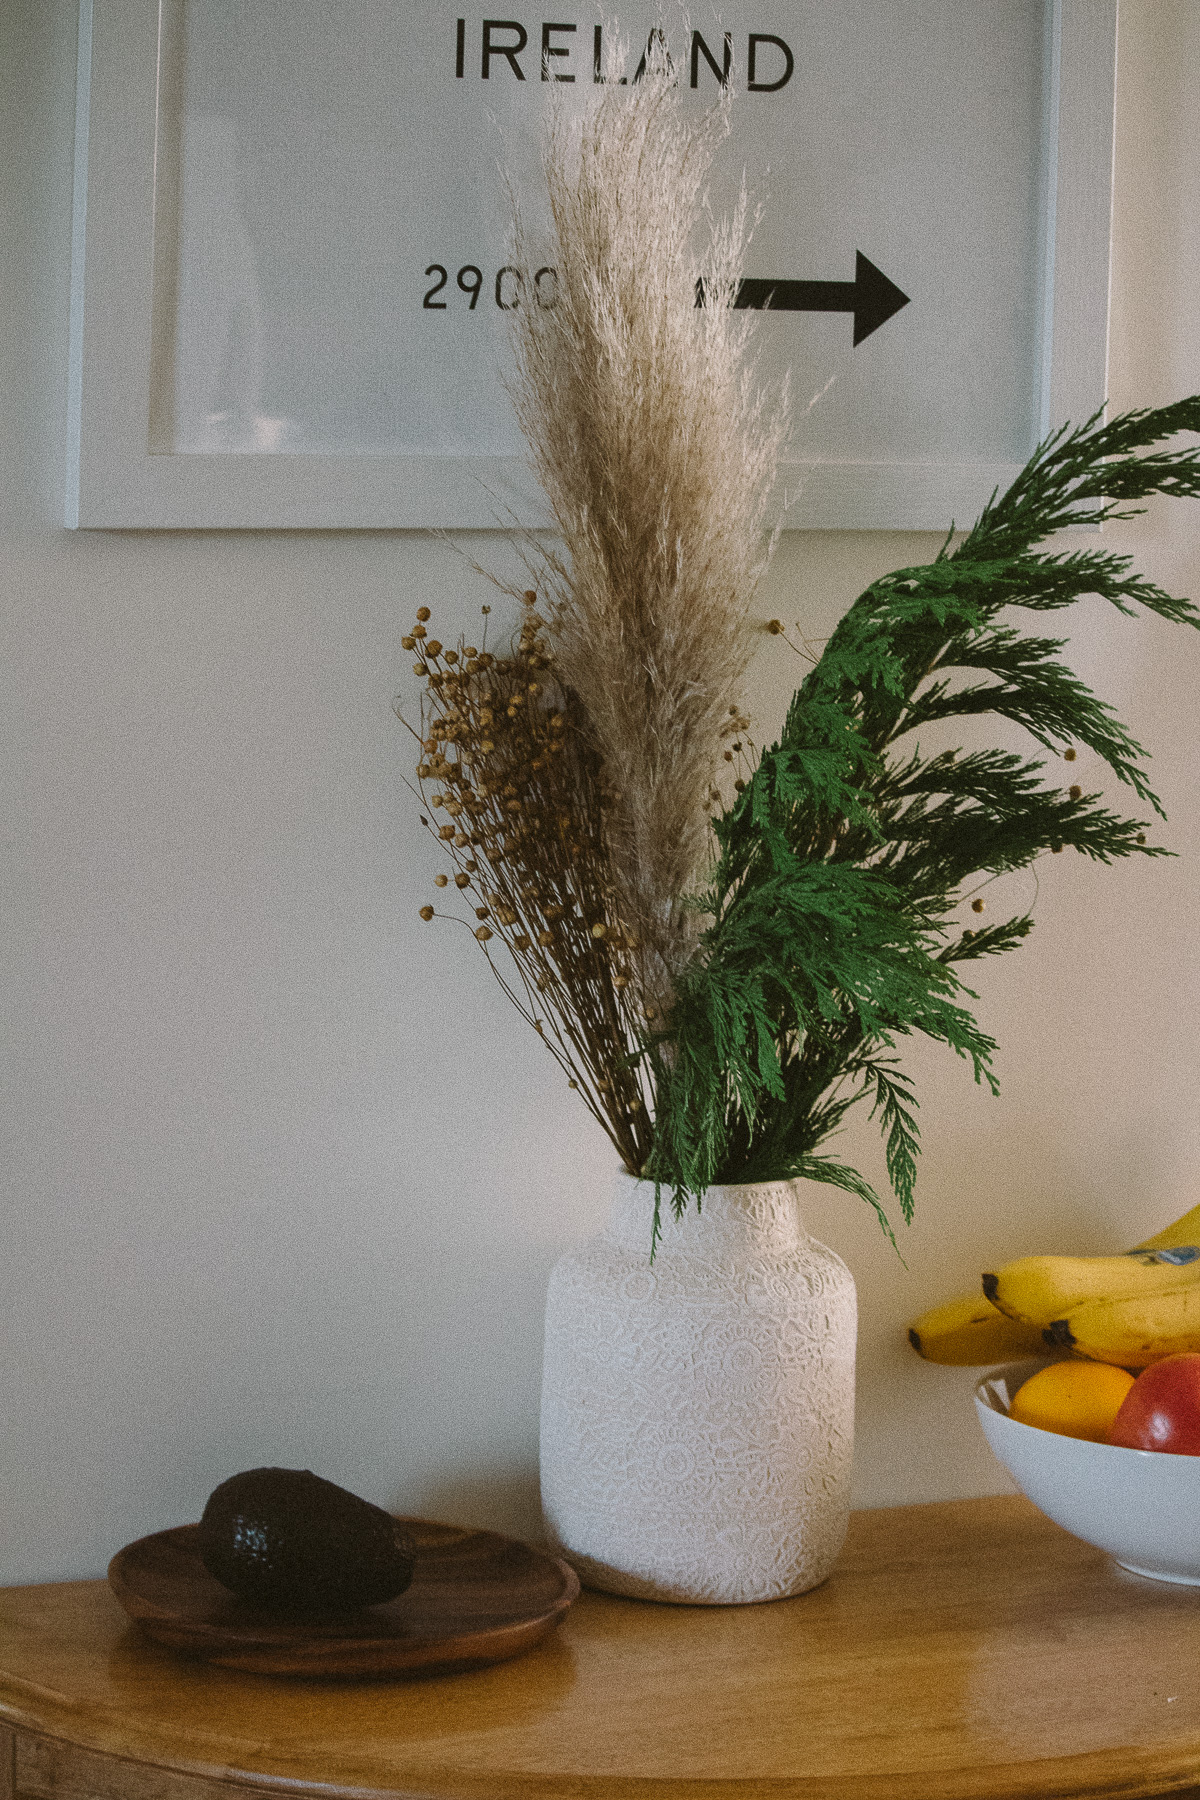 The Lavender Daily - My Simple + Sustainable Holiday Decor